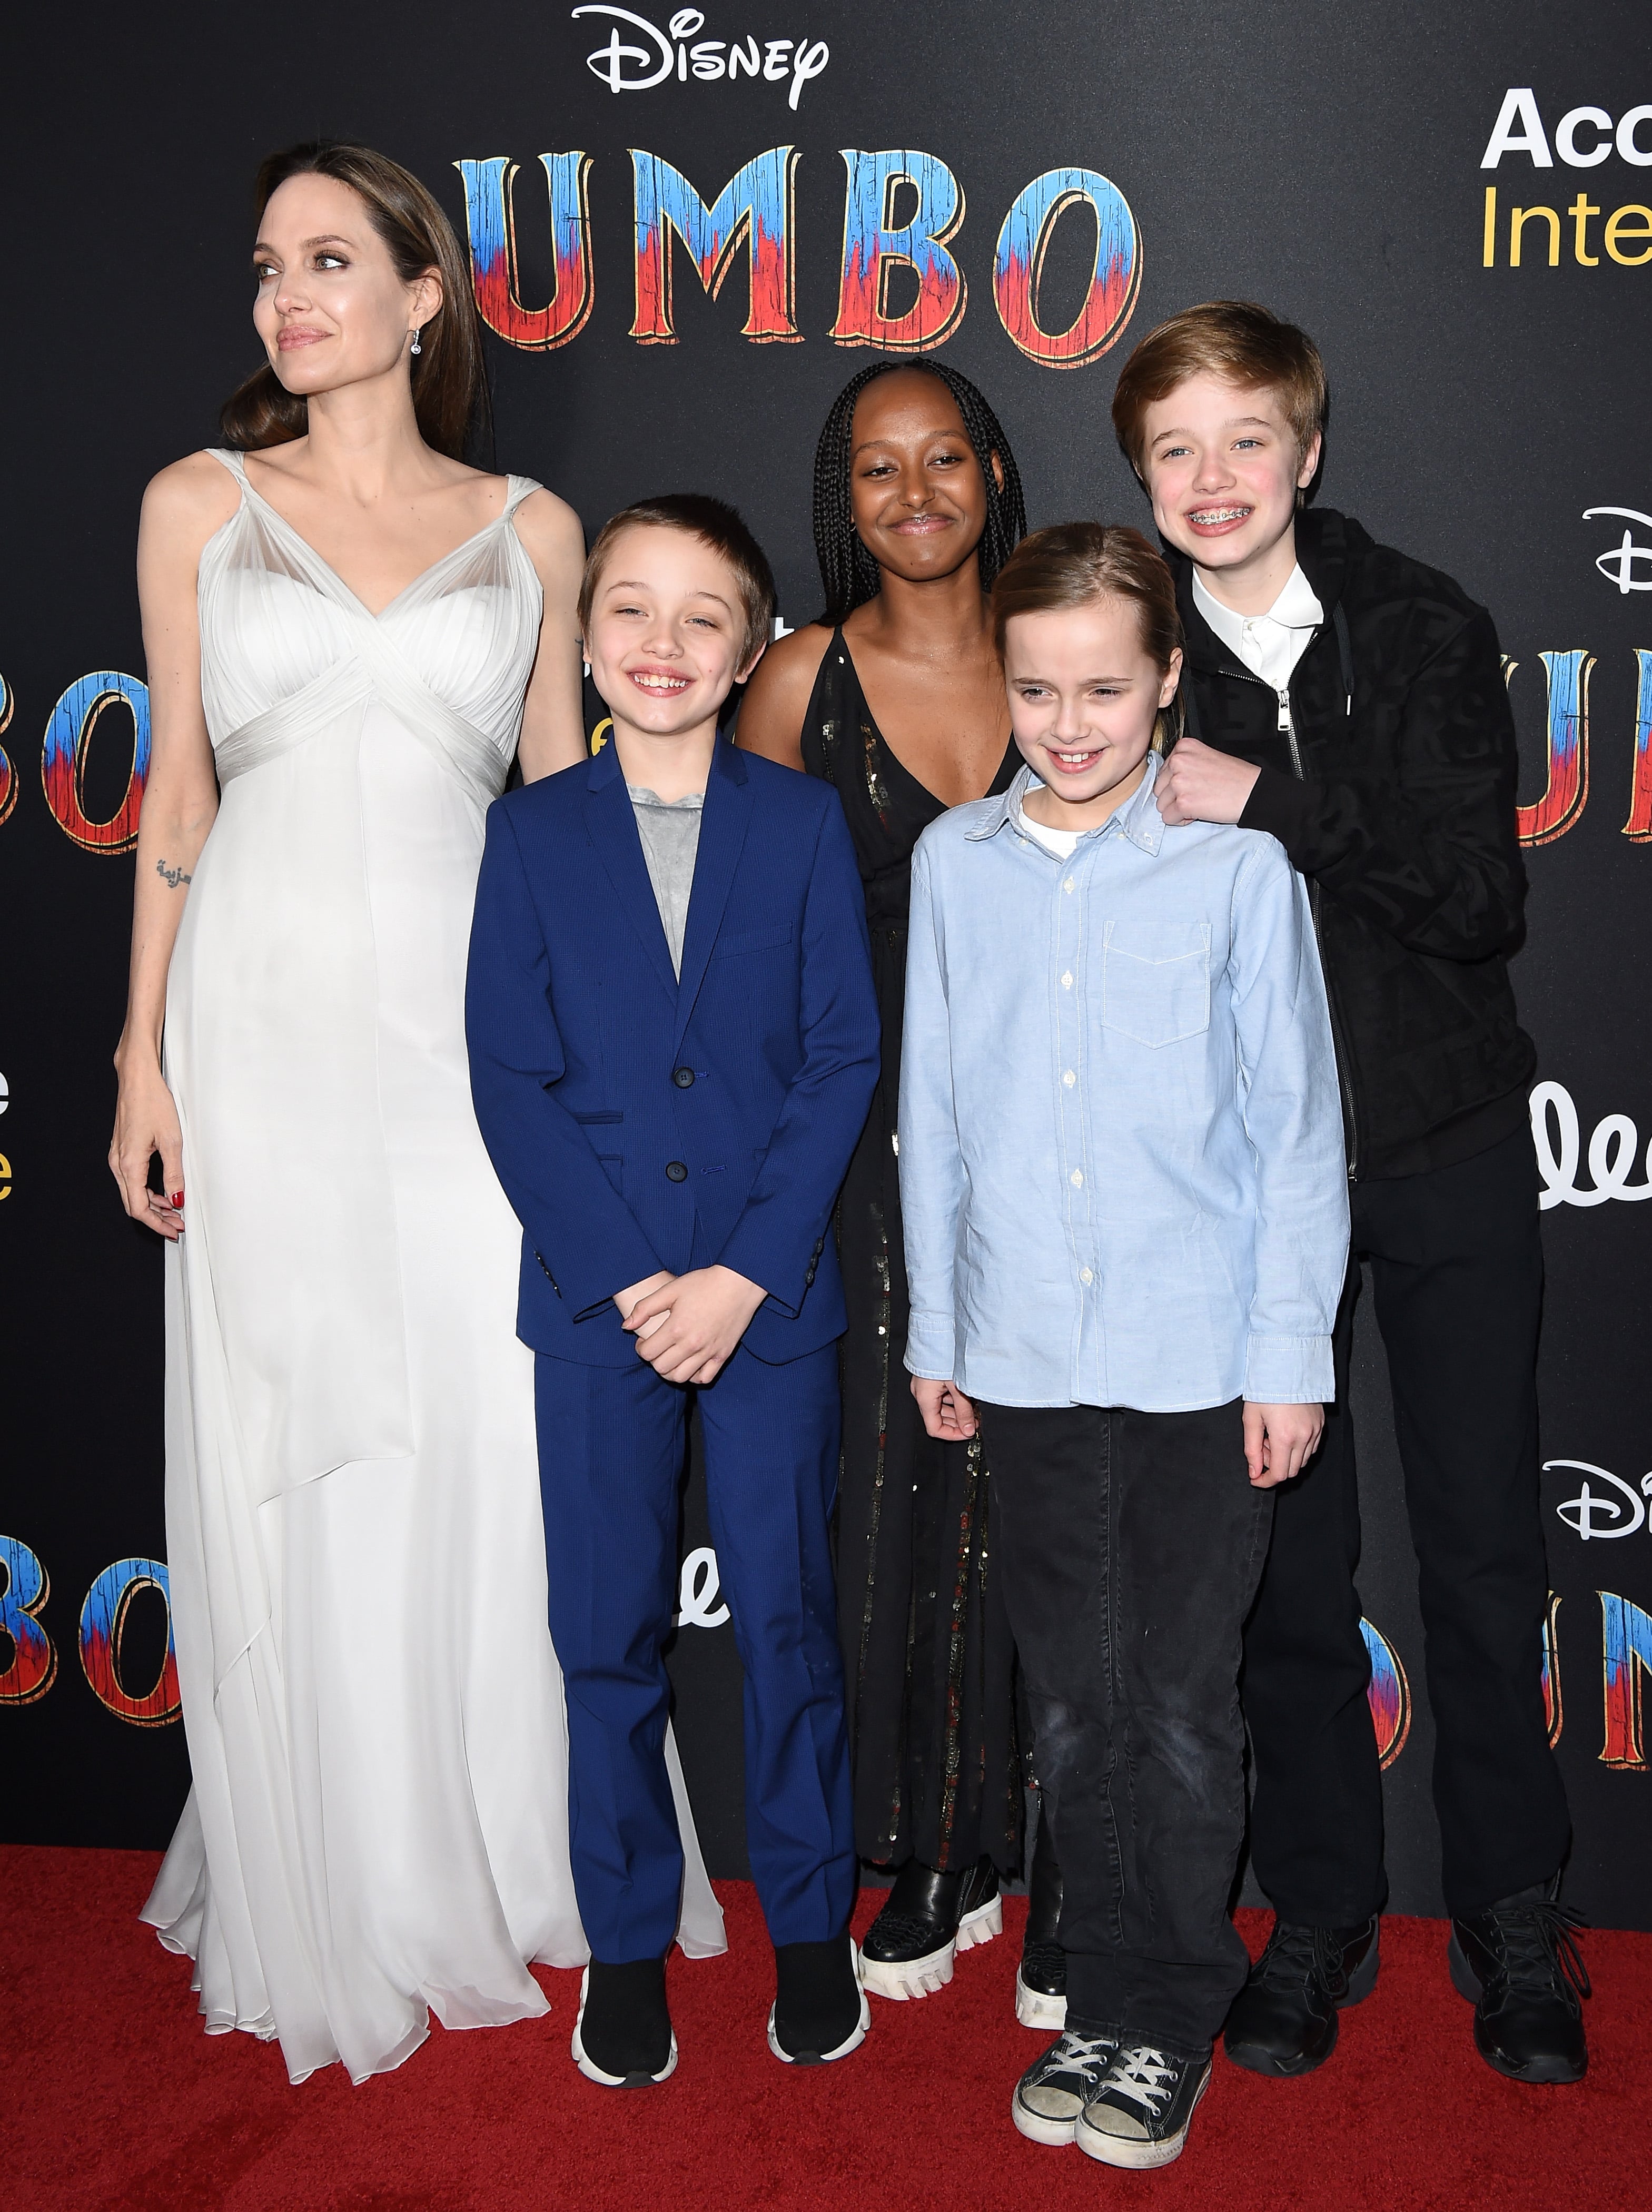 Who are Angelina Jolie and Brad Pitt's children, and what are they